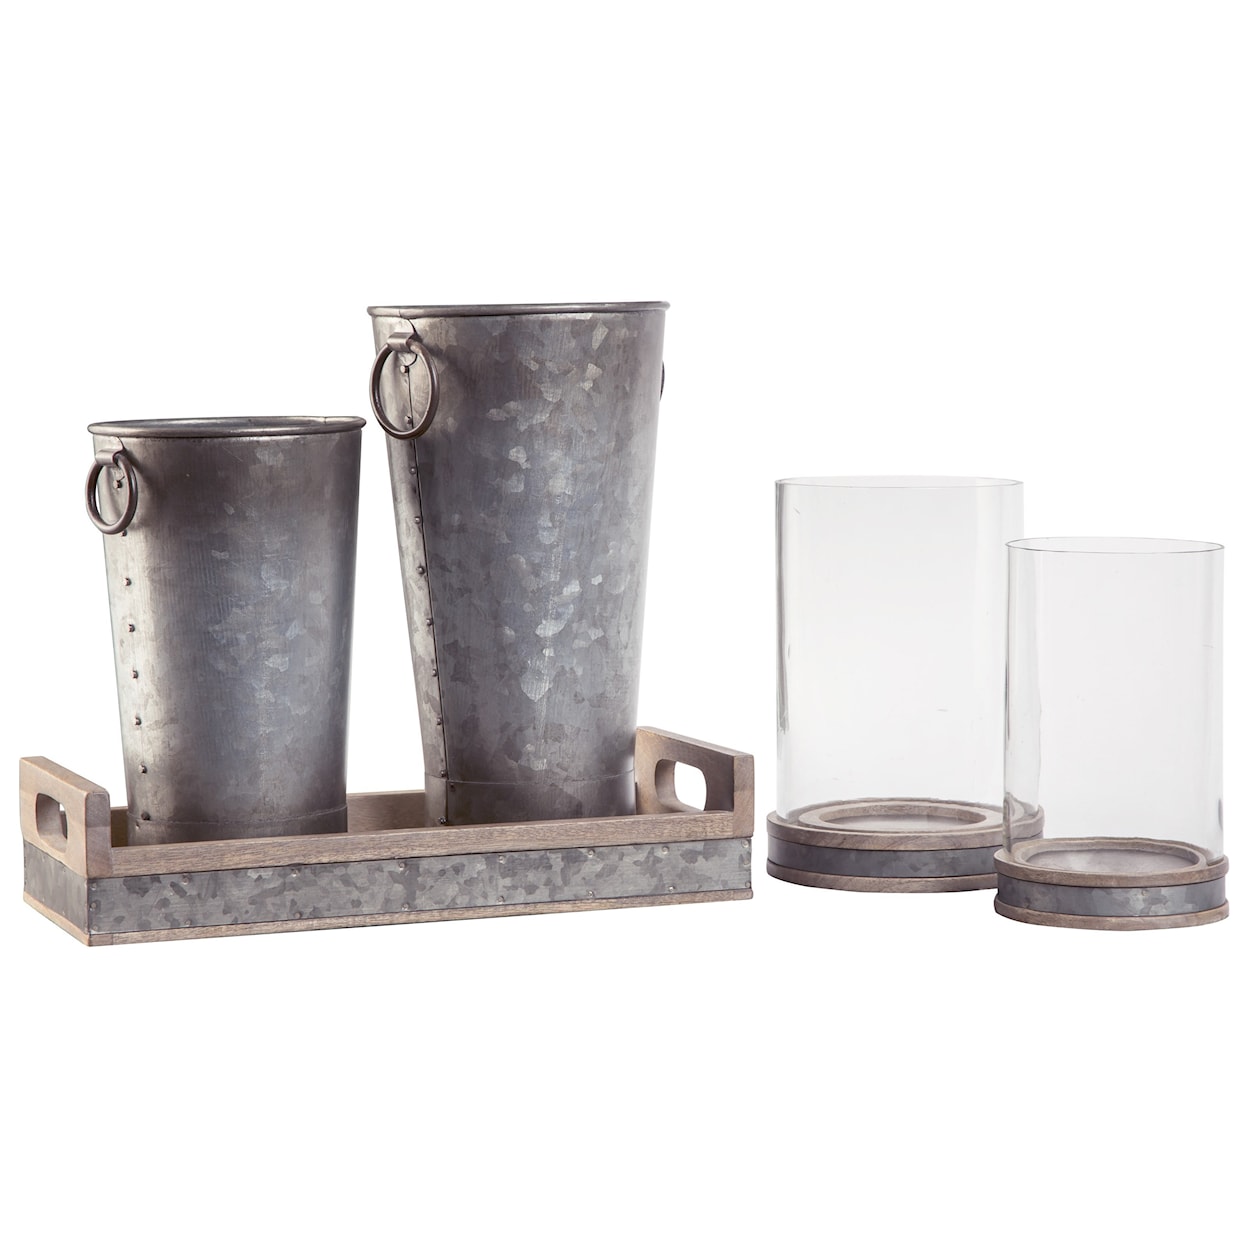 Signature Design by Ashley Accents 5-Piece Donae Natural/Gray Accessory Set